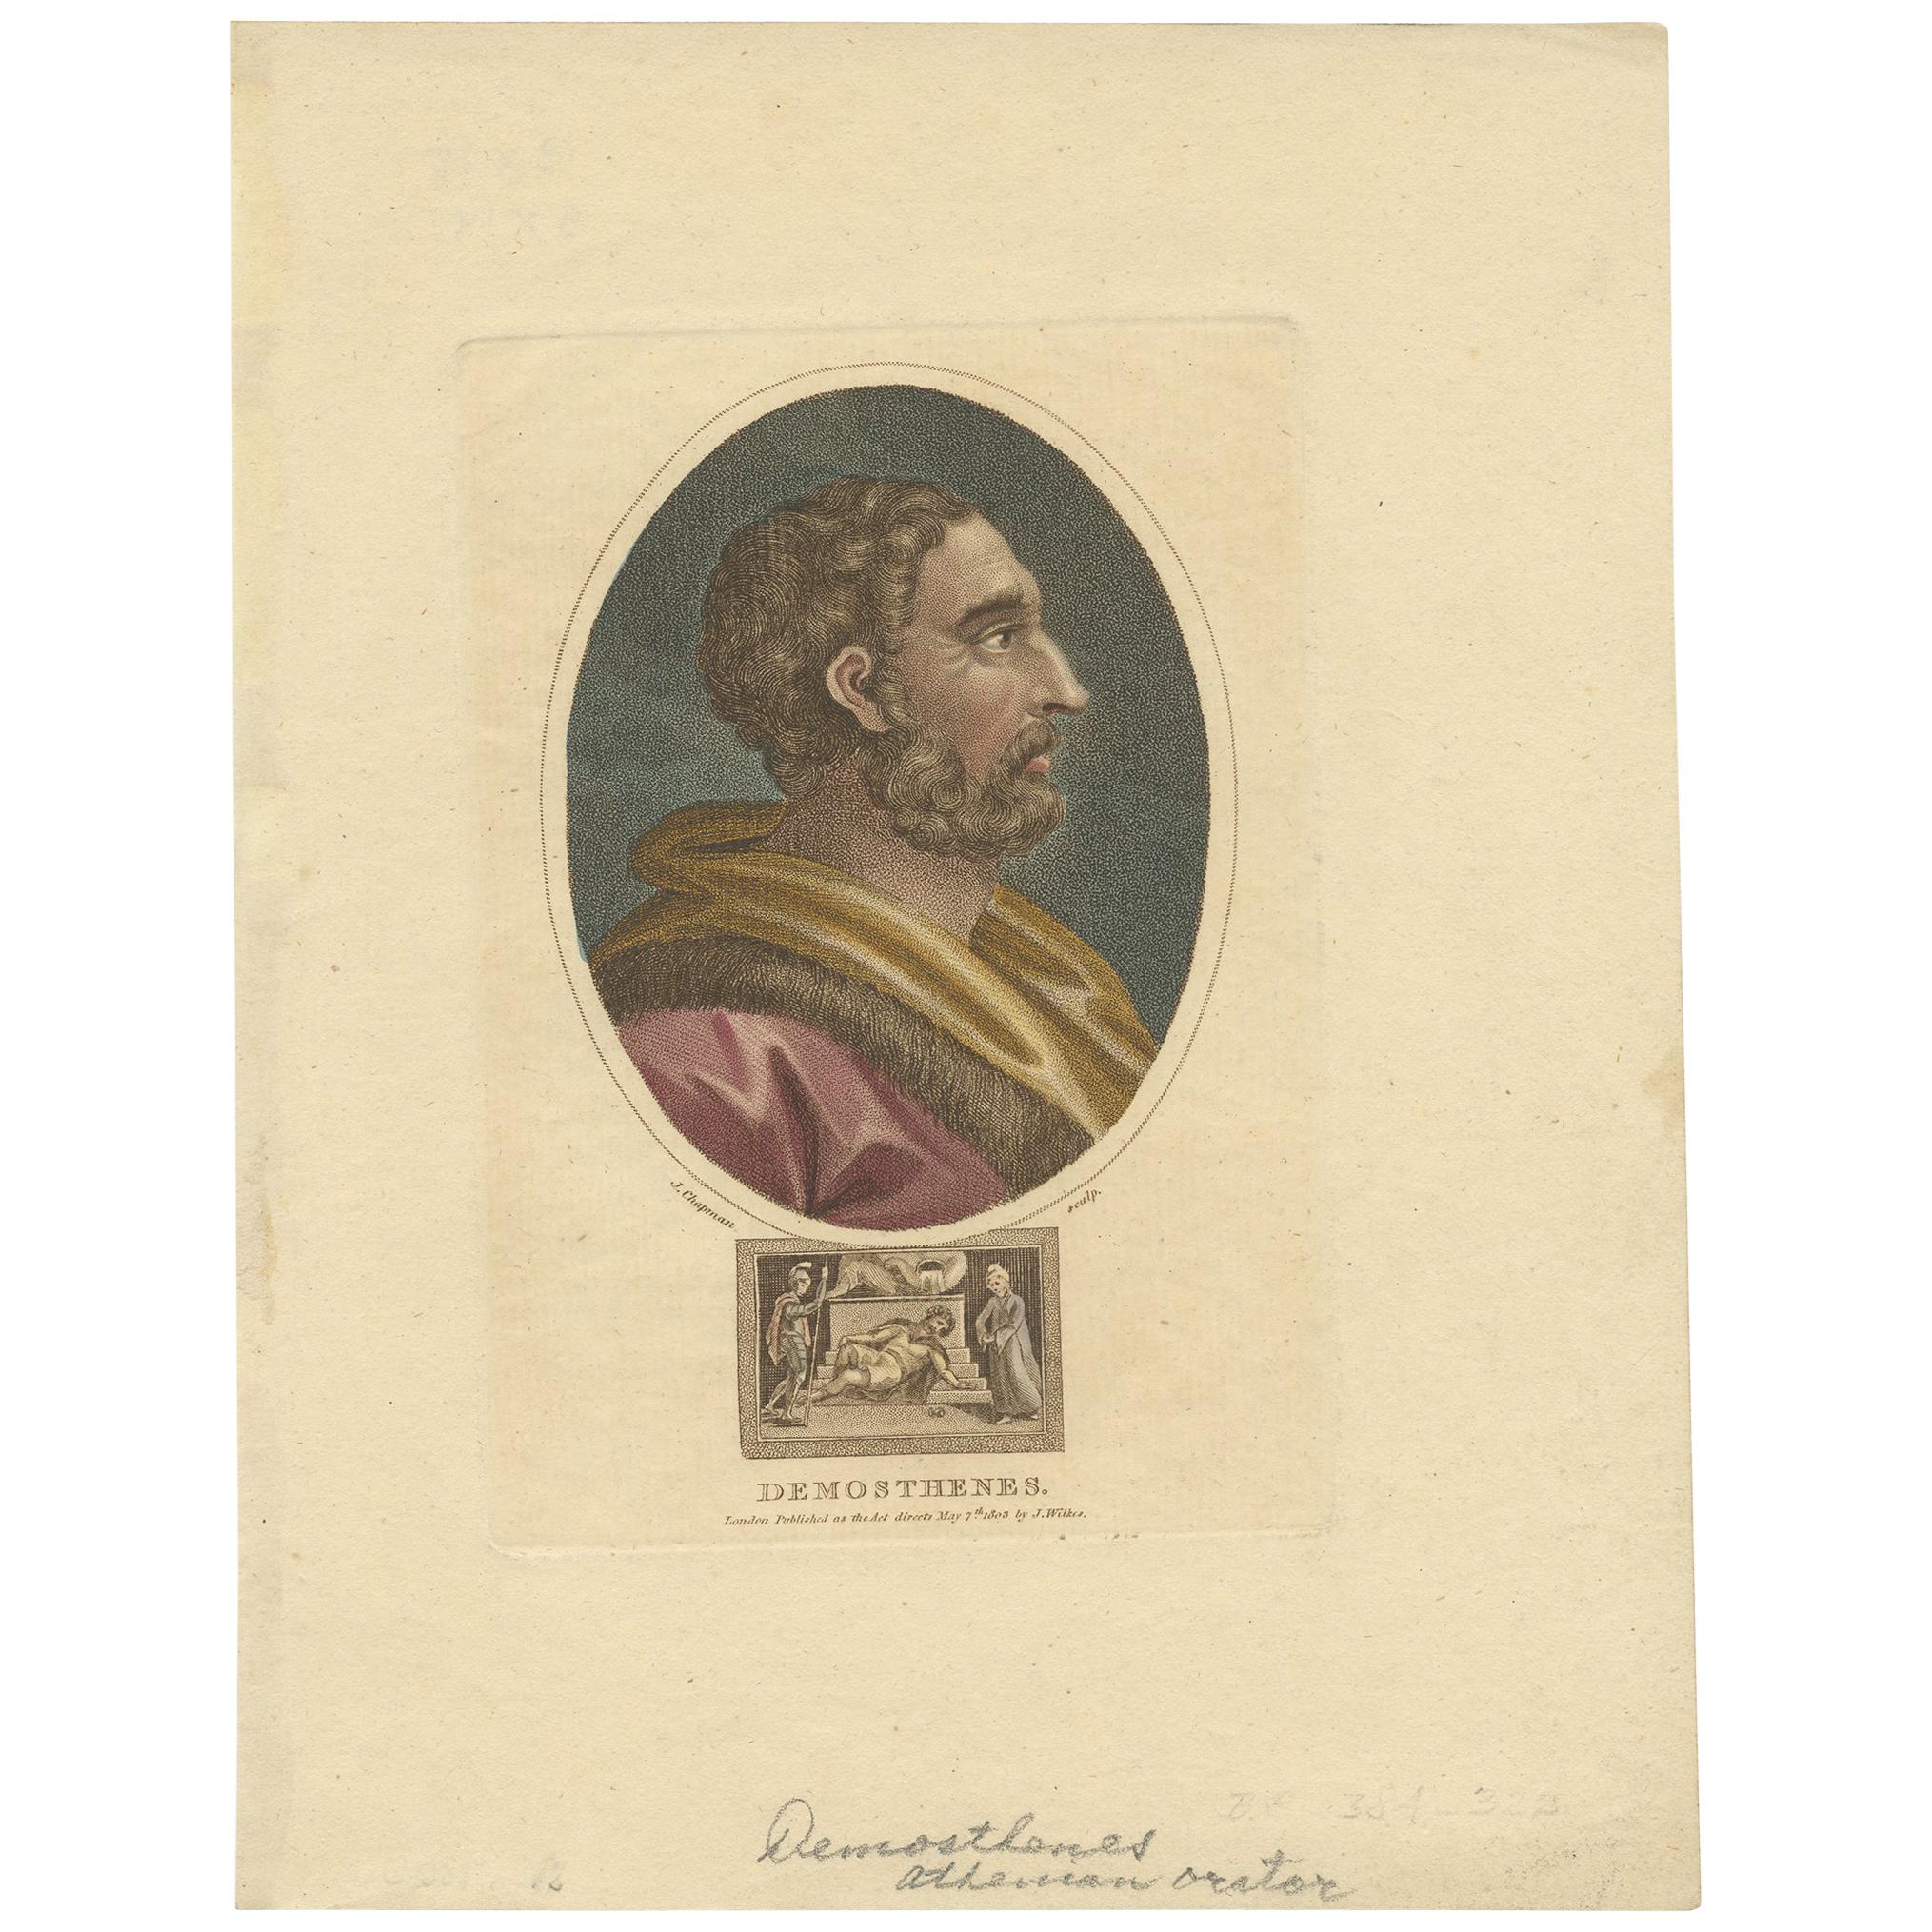 Antique Portrait of Demosthenes by Wilkes, '1803'